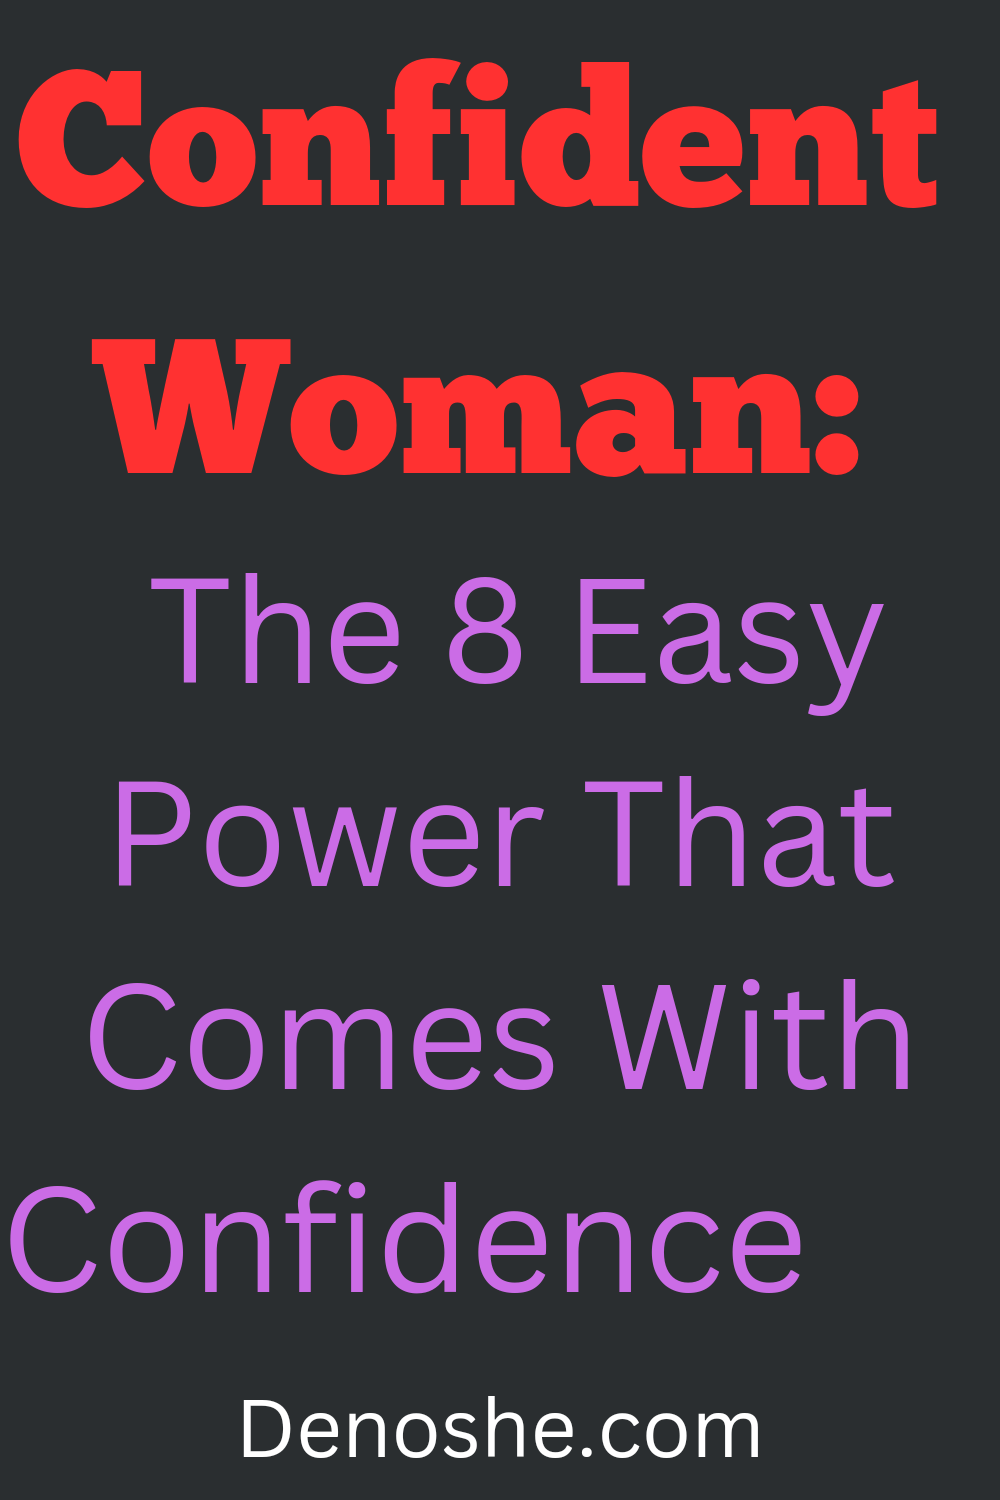 be that lady with class that deserves the attention of others. Confidence woman